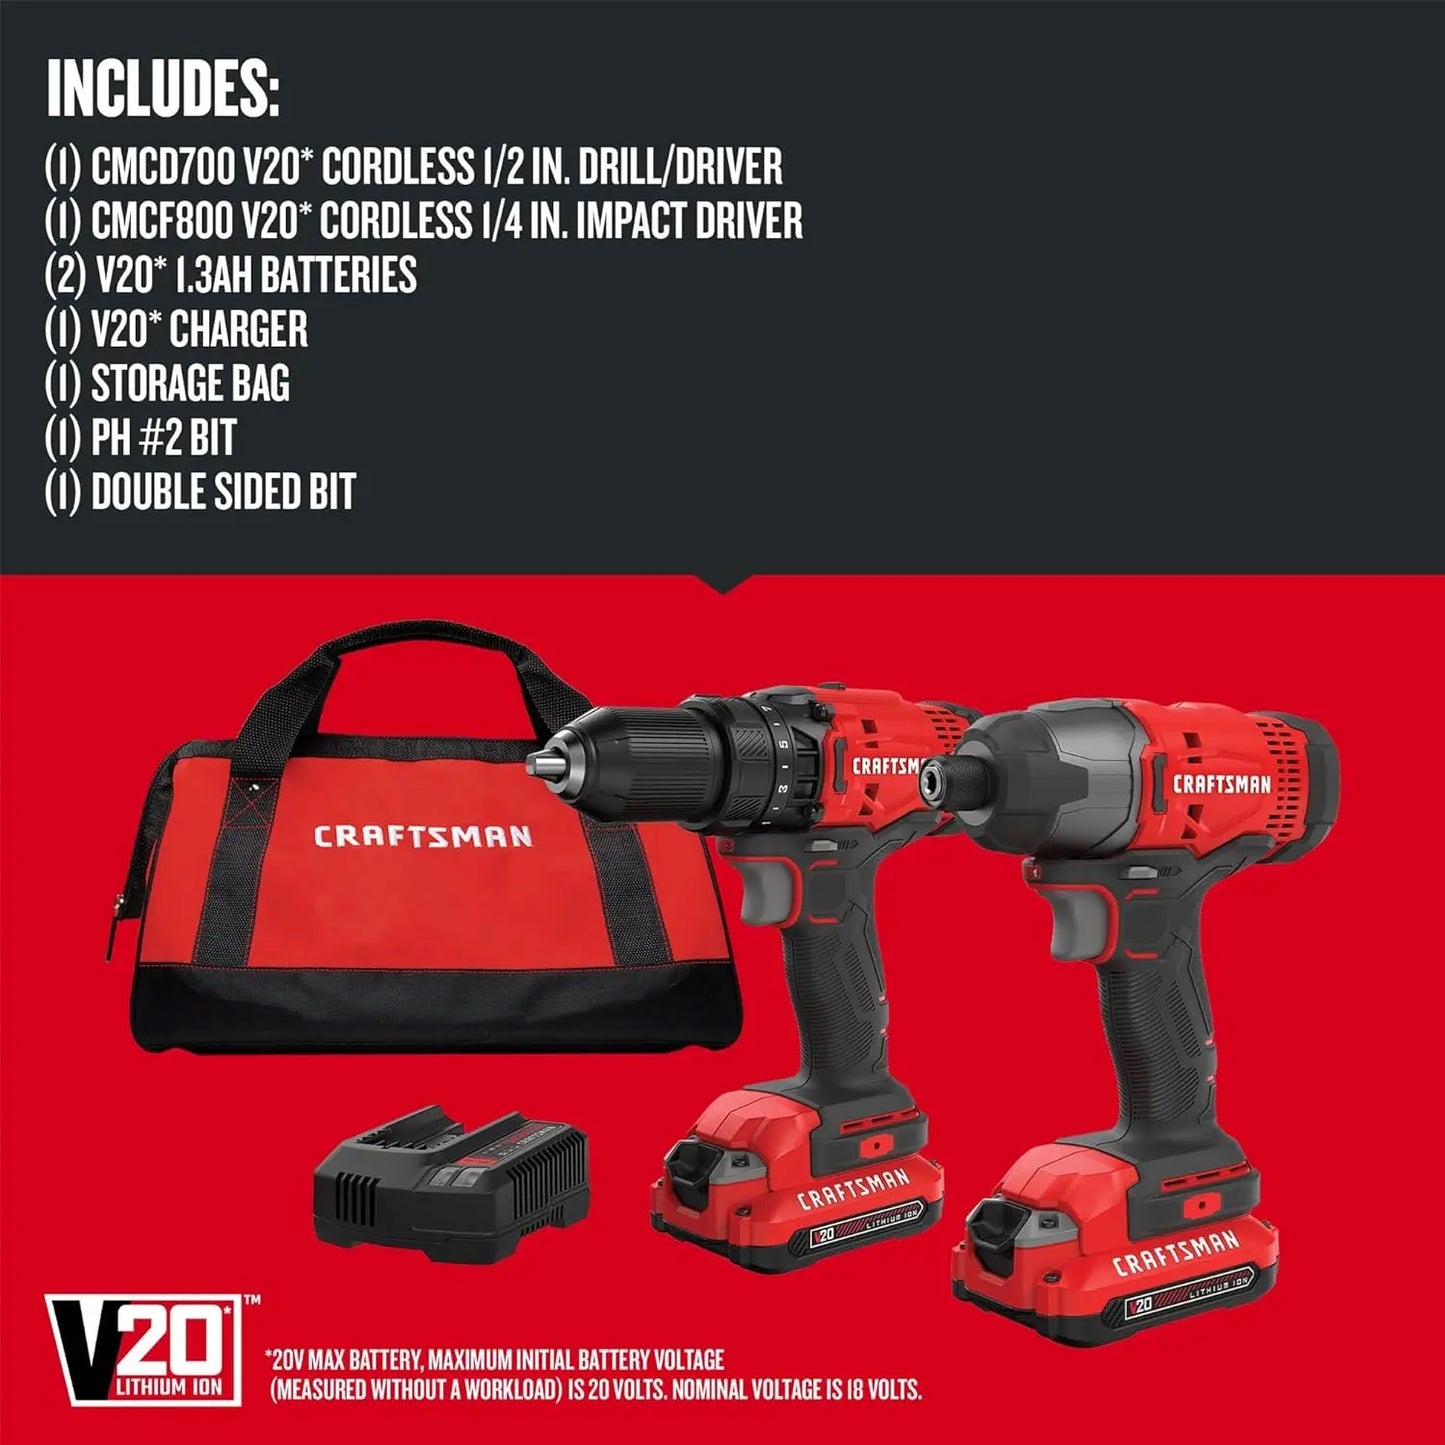 V20 MAX Cordless Drill and Impact Driver, Power Tool Combo Kit with 2 Batteries and Charger (CMCK200C2AM)